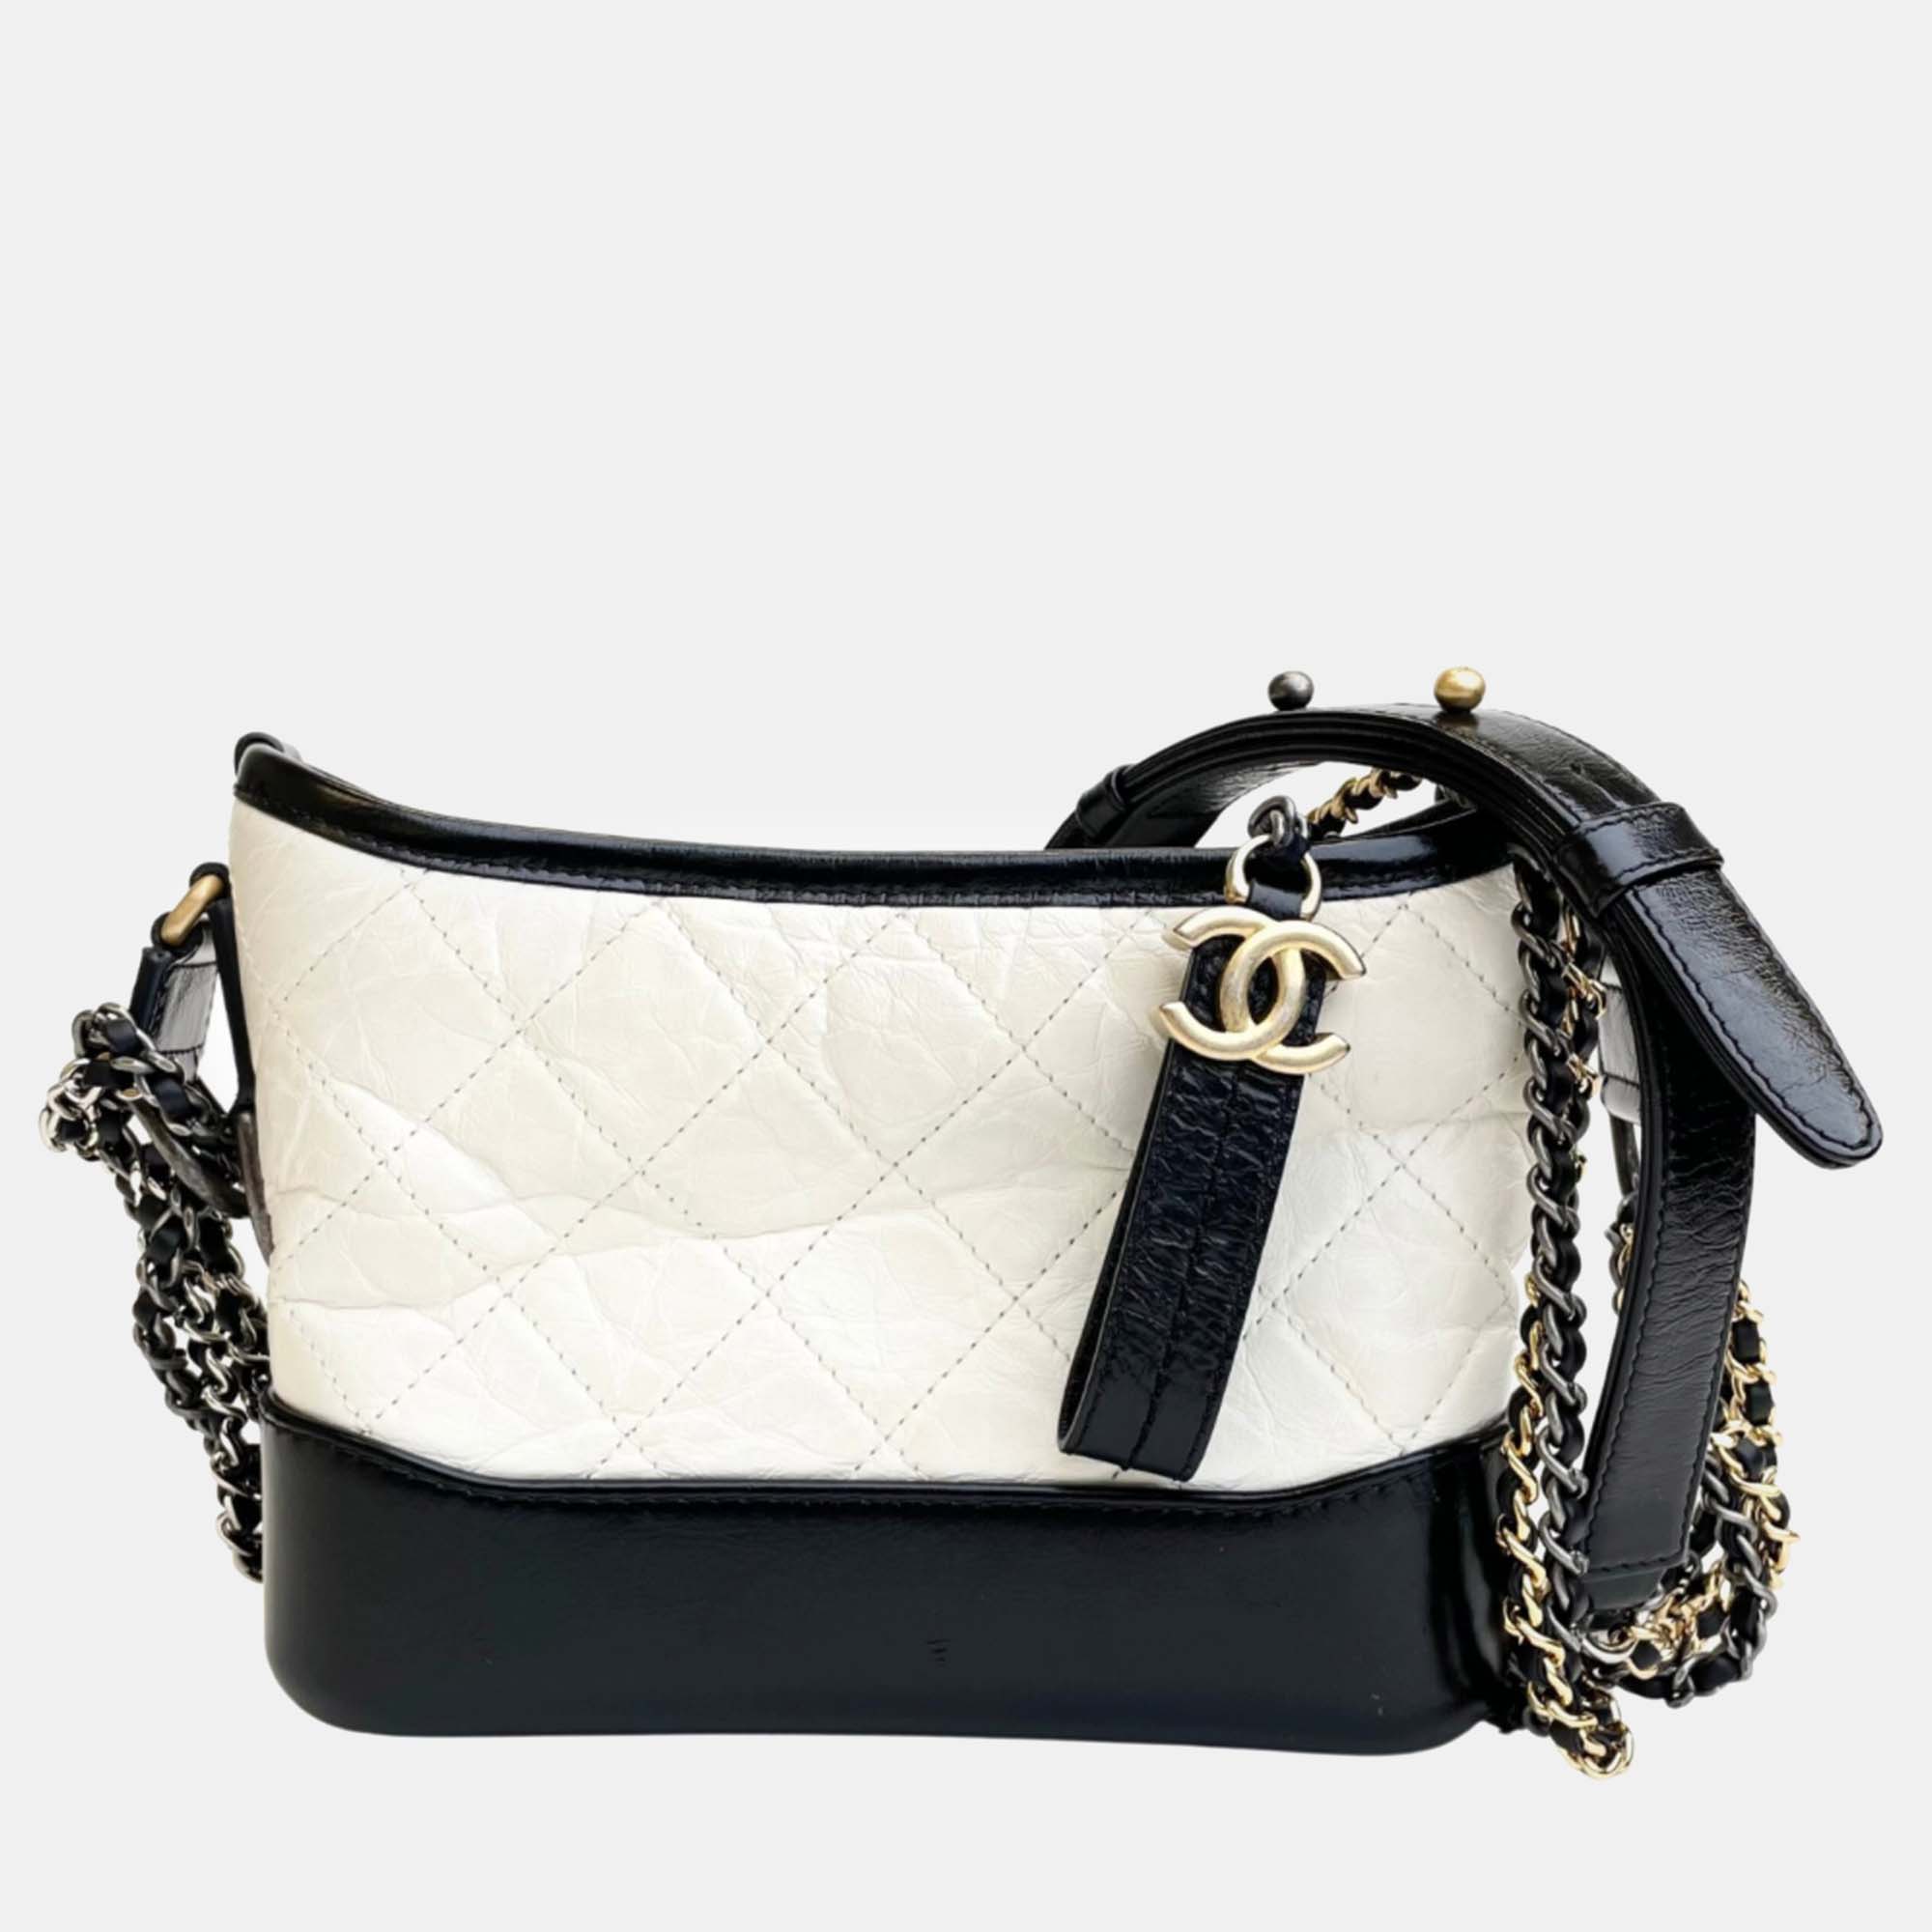 Chanel white/black  leather small gabrielle shoulder bags